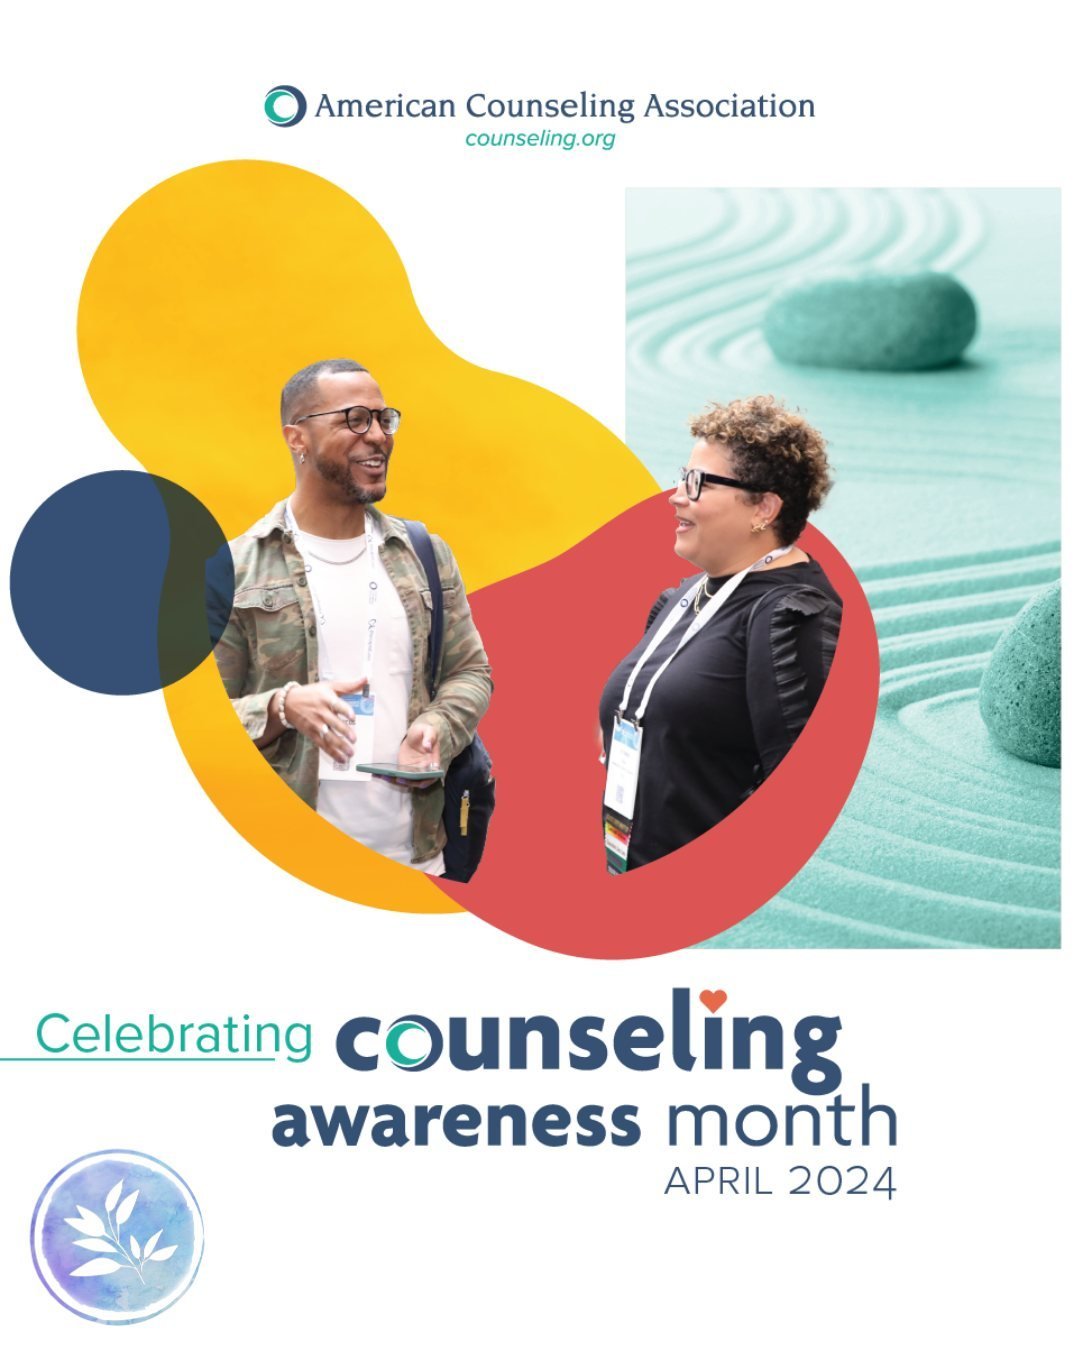 🌿 Celebrating Counseling Awareness Month

April is Counseling Awareness Month, celebrating the vital role of counseling in promoting mental health and well-being. At Restorative Pathways Counseling, we're proud to offer compassionate, client-centere